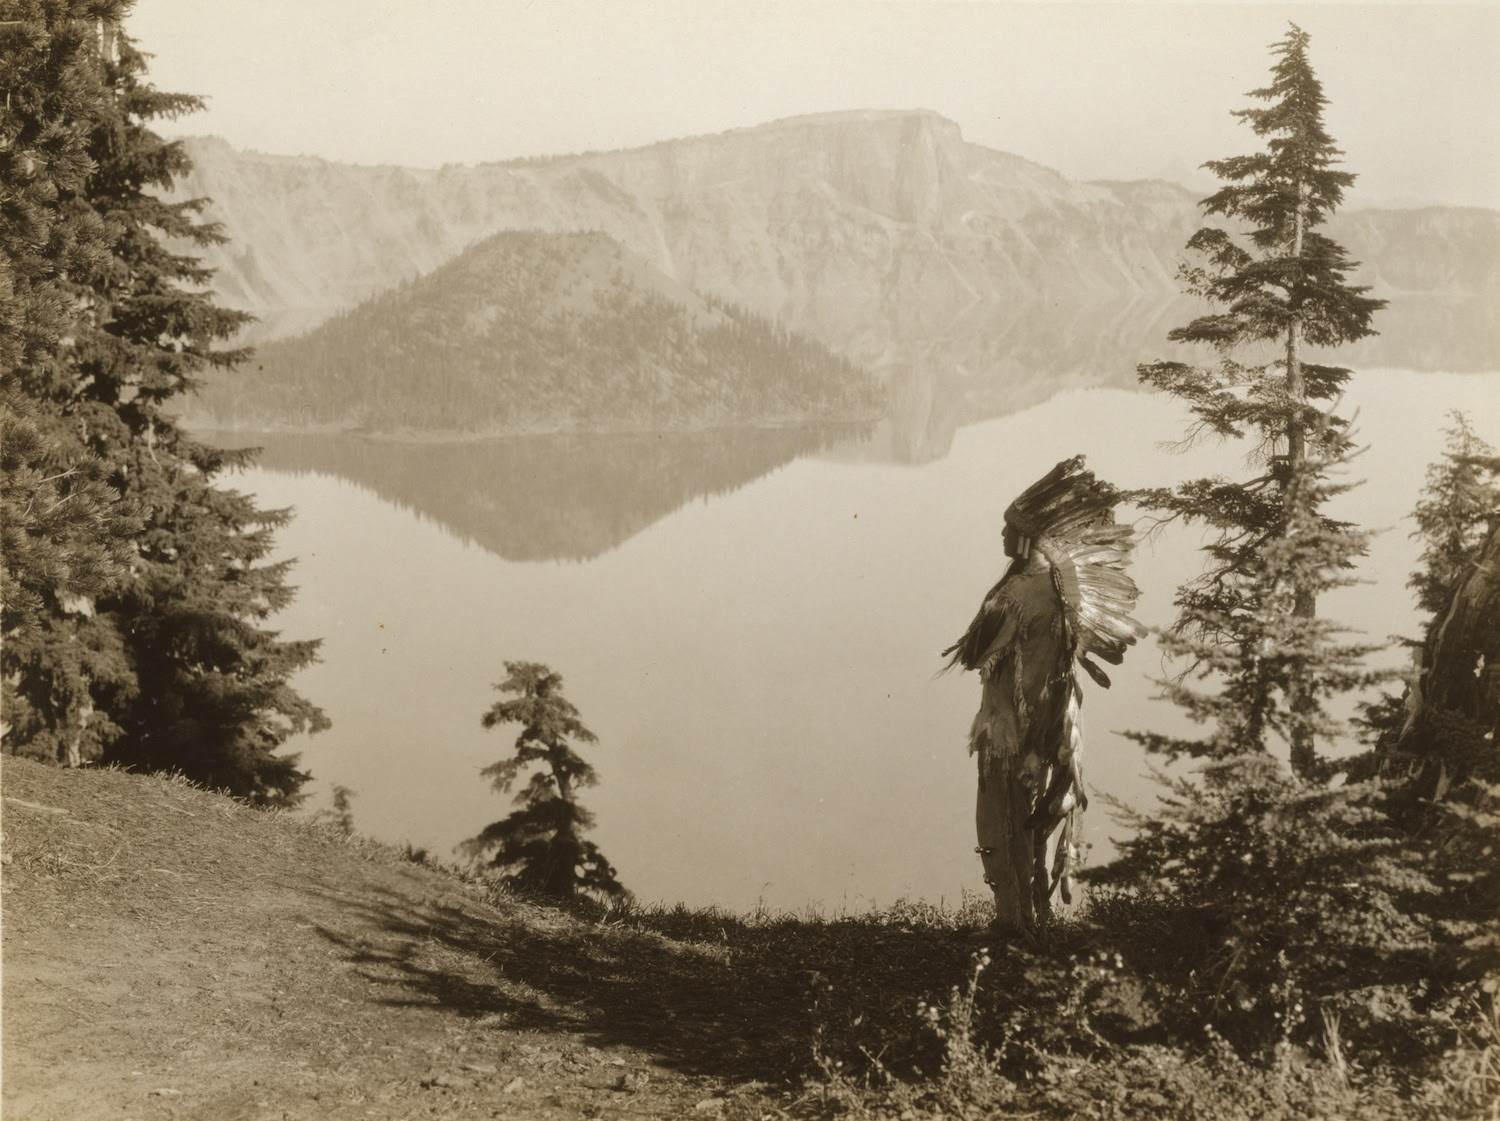 Klamath Indian chief in ceremonial headdress standing on hill overlooking lake, California or Oregon. November 2021